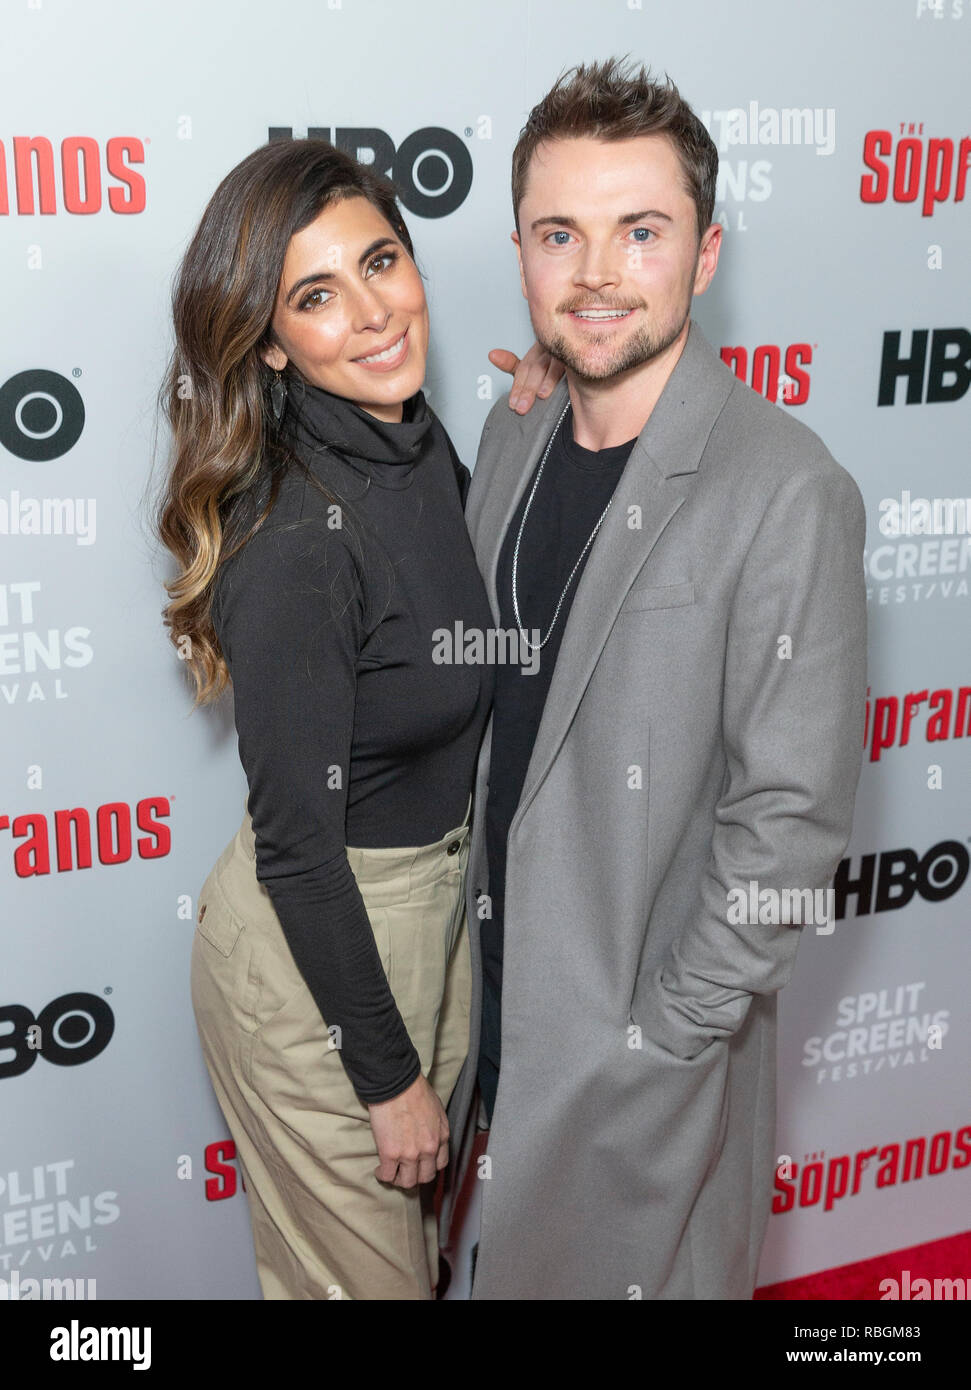 New York, United States. 09th Jan, 2019. Jamie-Lynn Sigler and Robert Iler attend The Sopranos 20th Anniversary screening and discussion at SVA Theater Credit: Lev Radin/Pacific Press/Alamy Live News Stock Photo